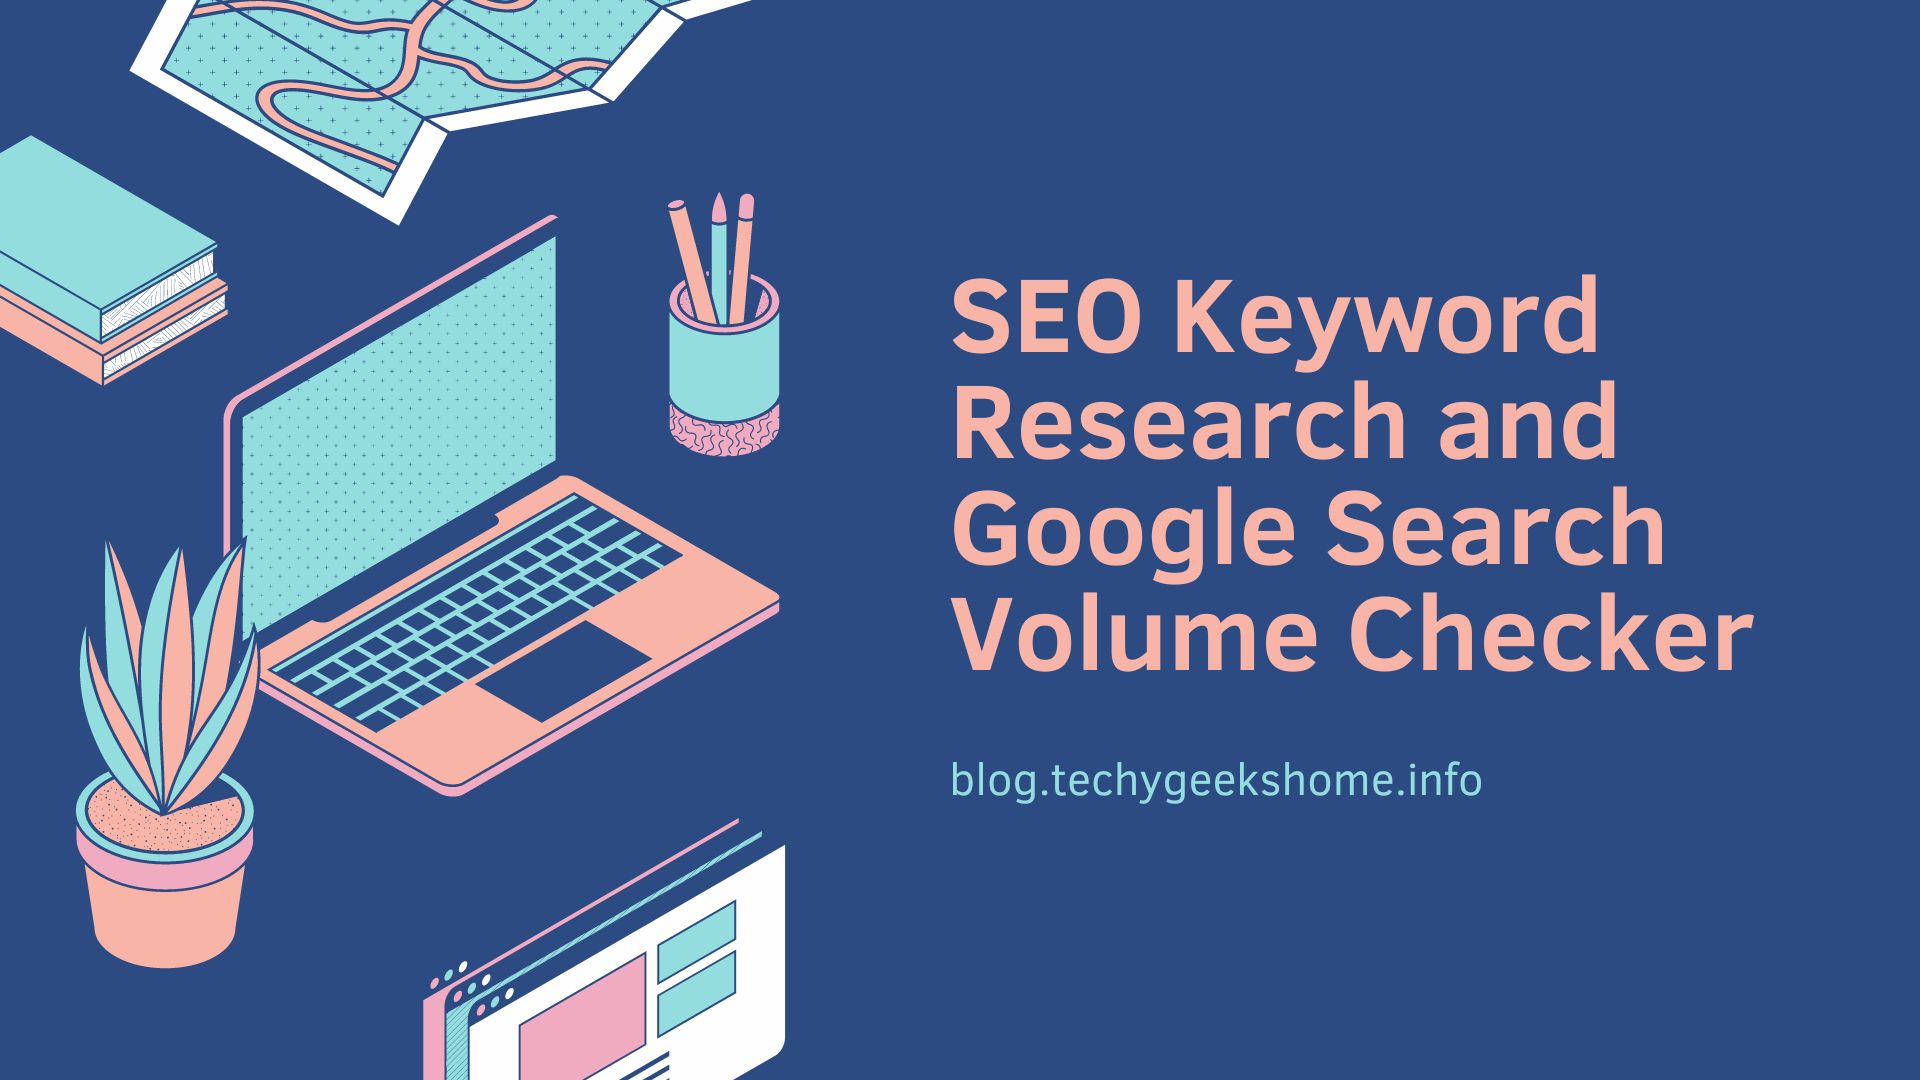 An illustrative graphic showing a laptop, books, a potted plant, and stationery, indicating tools for SEO keyword research through Google Ads and checking search volume.